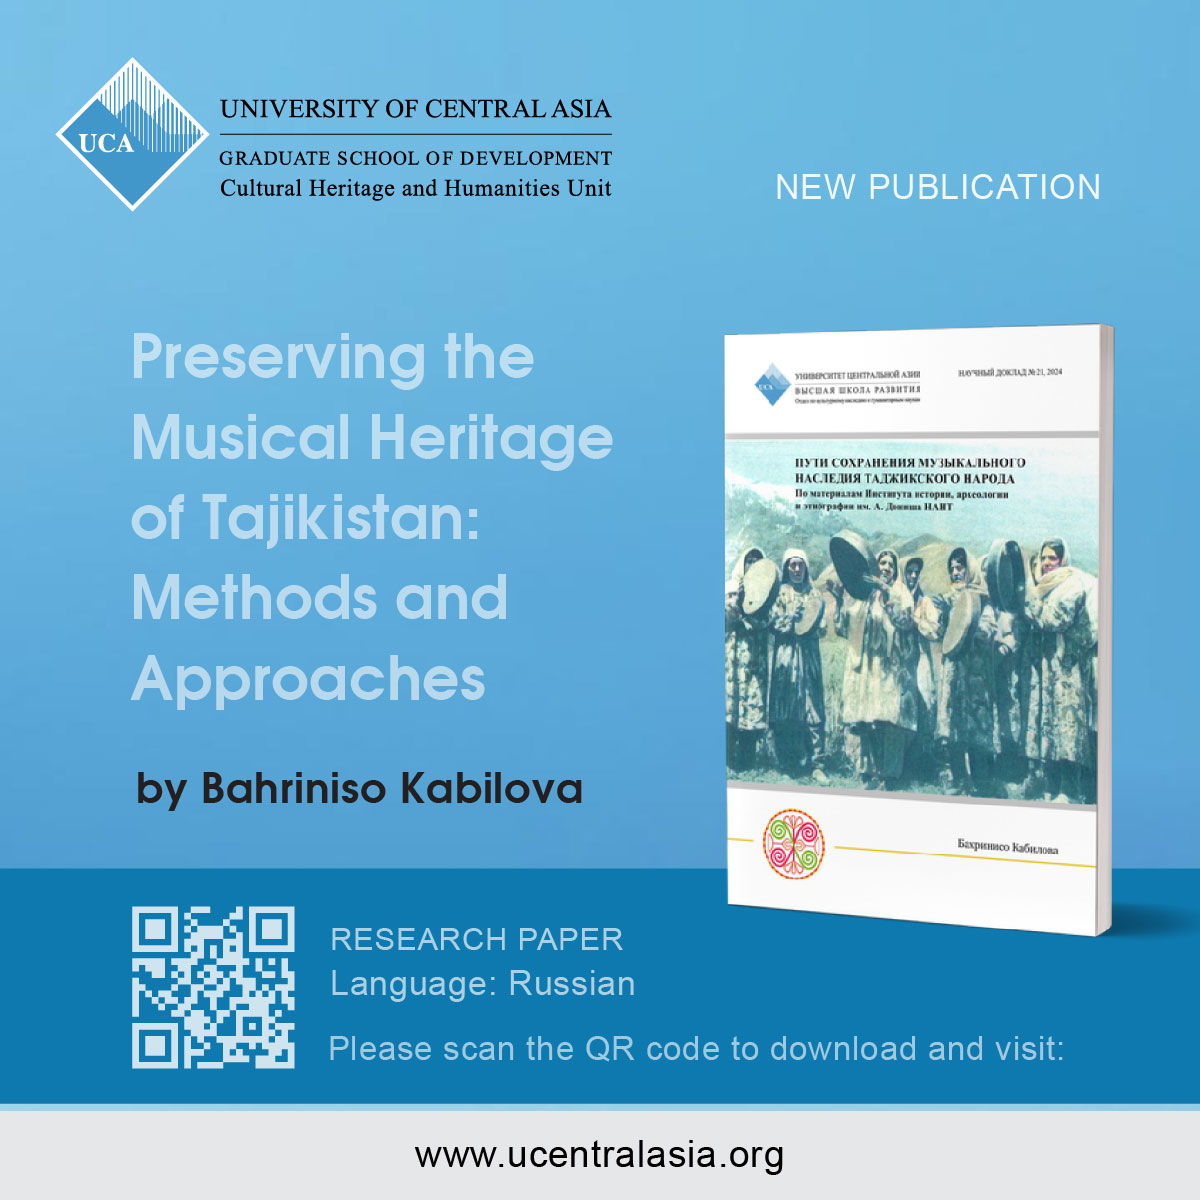 #UCA_GSD Cultural Heritage and Humanities Unit's new publication: Preserving the Musical Heritage of Tajikistan: Methods and Approaches by Dr Bahriniso Kabilova Access (in Russian): ucentralasia.org/publications/2…